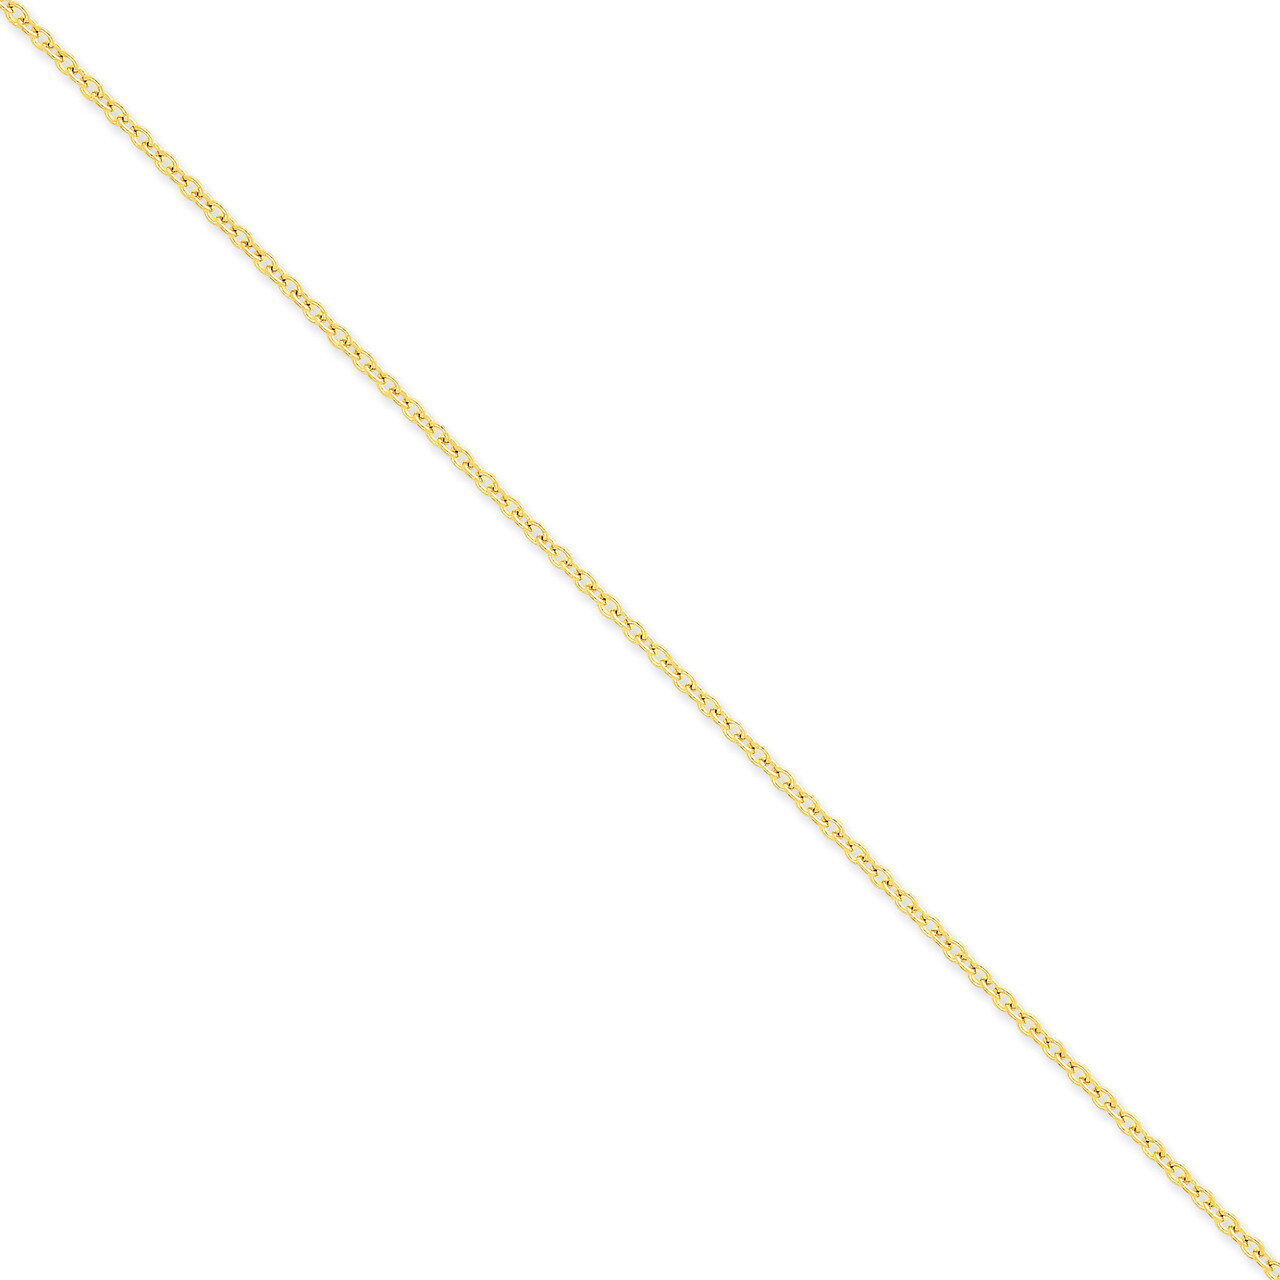 2.4mm Cable Chain 18 Inch 14k Gold PEN217-18